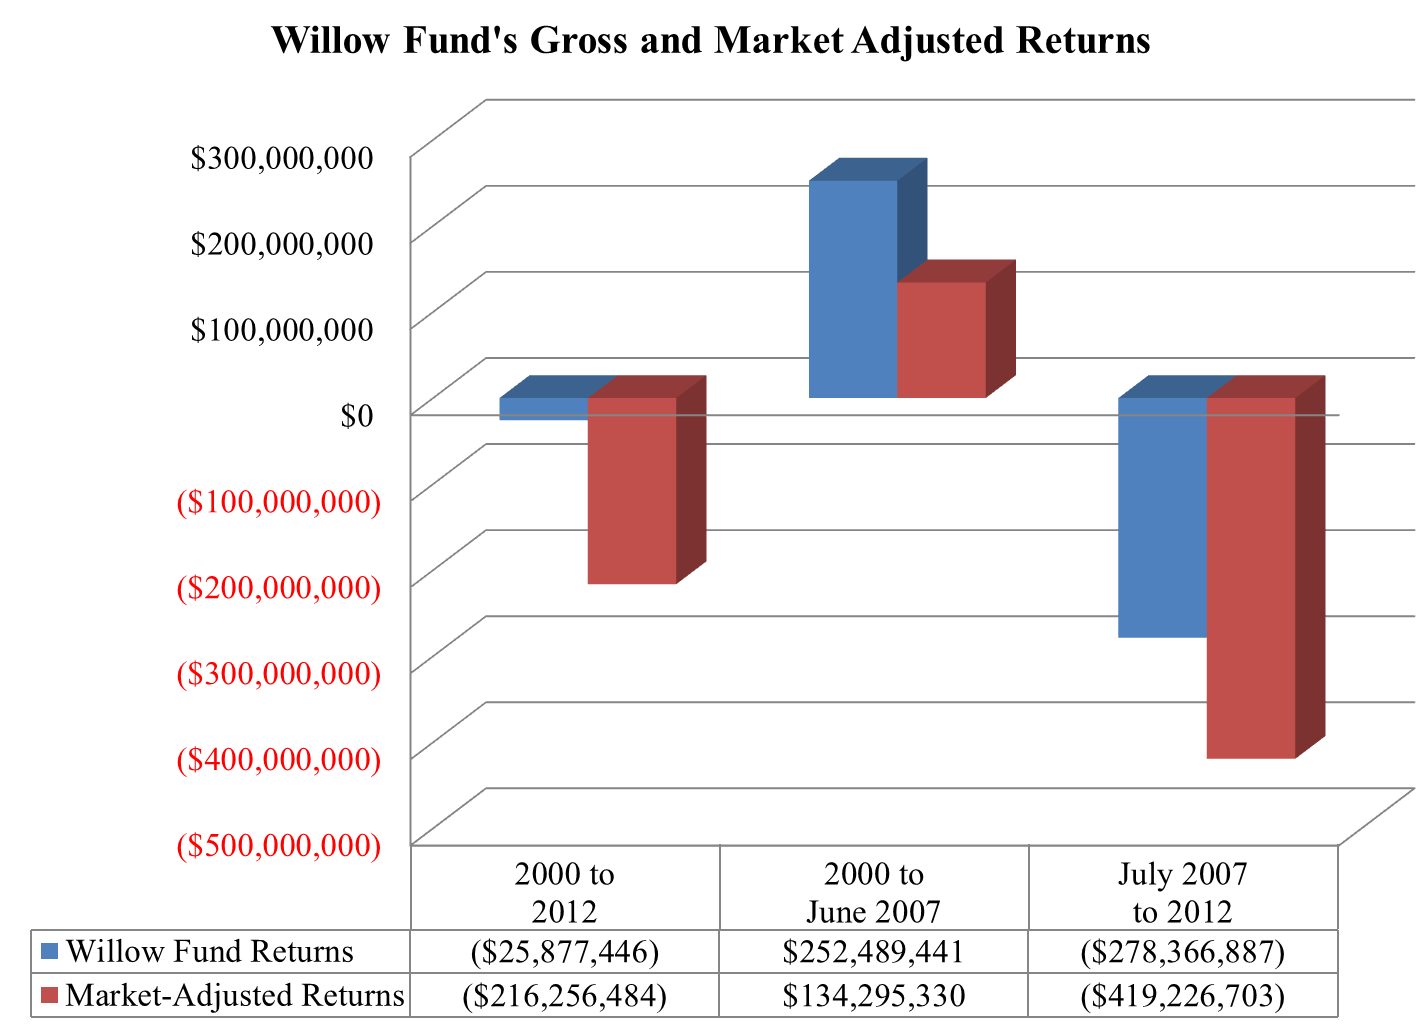 A figure showing a bar graph demonstrating Willow Fund's gross and market adjusted returns from 2000 to 2012.